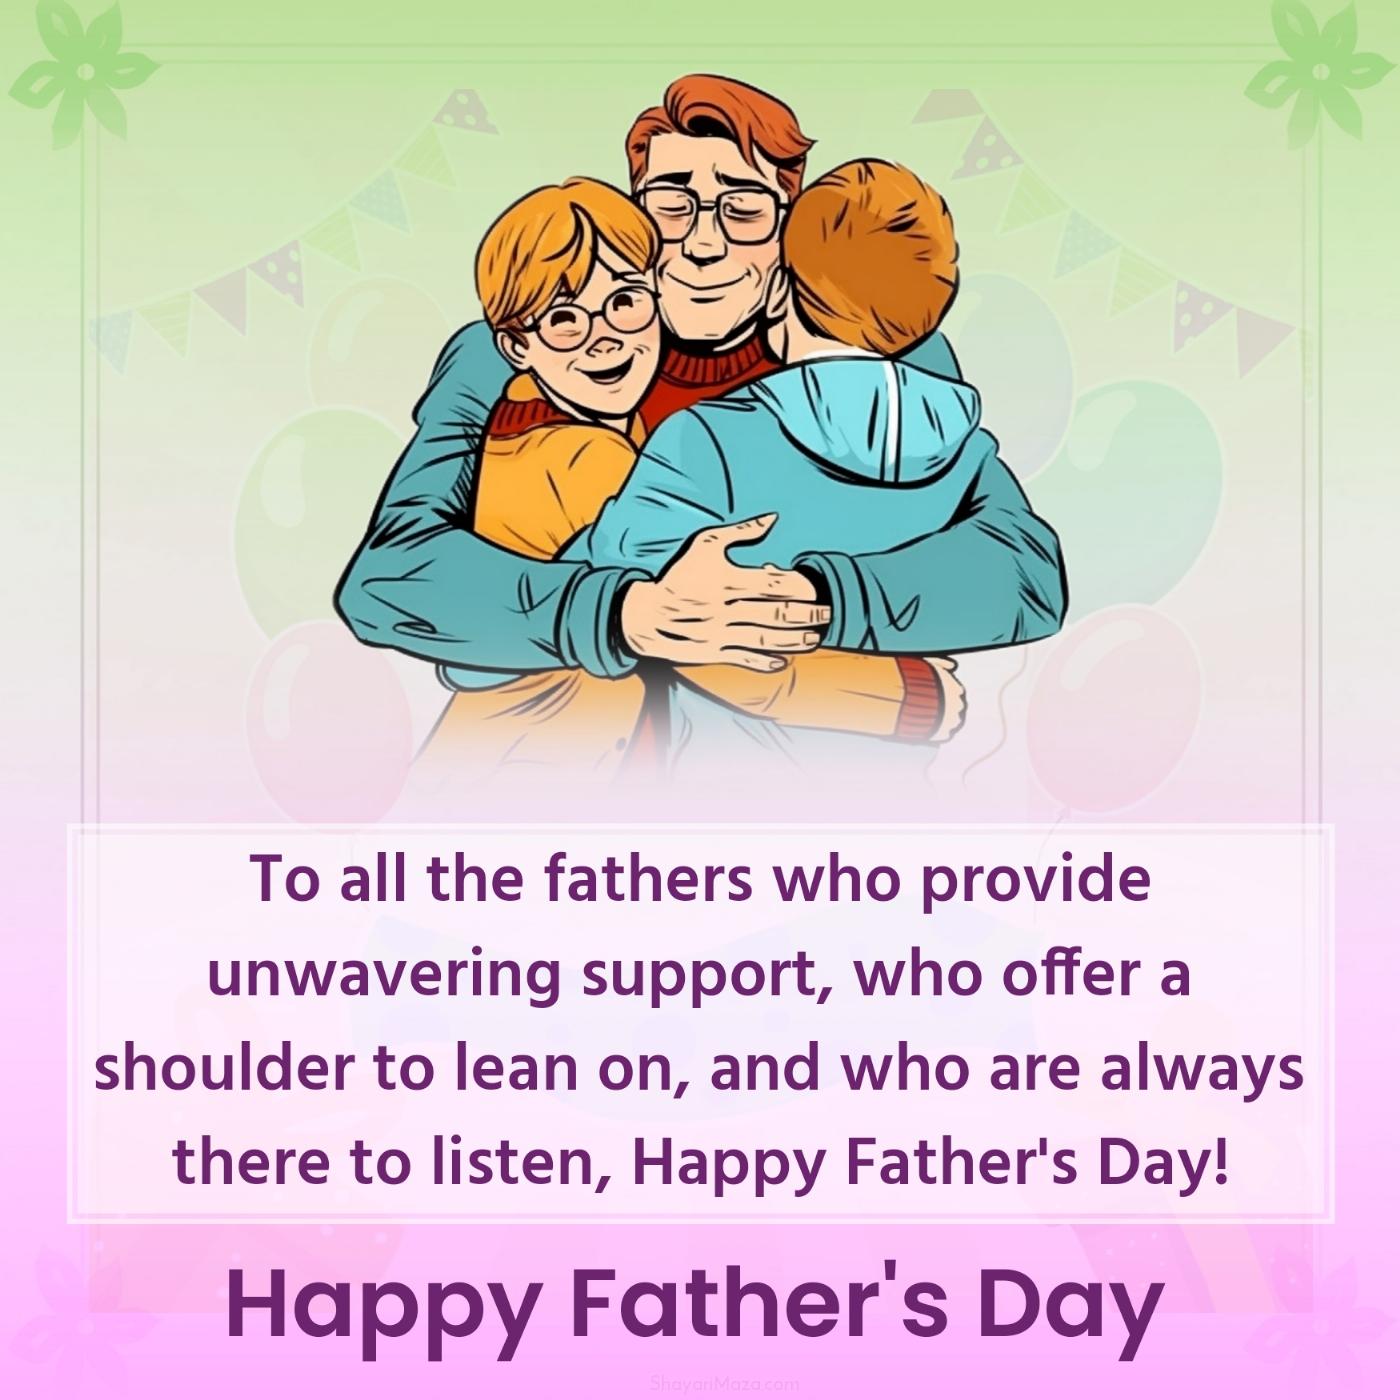 To all the fathers who provide unwavering support who offer a shoulder to lean on